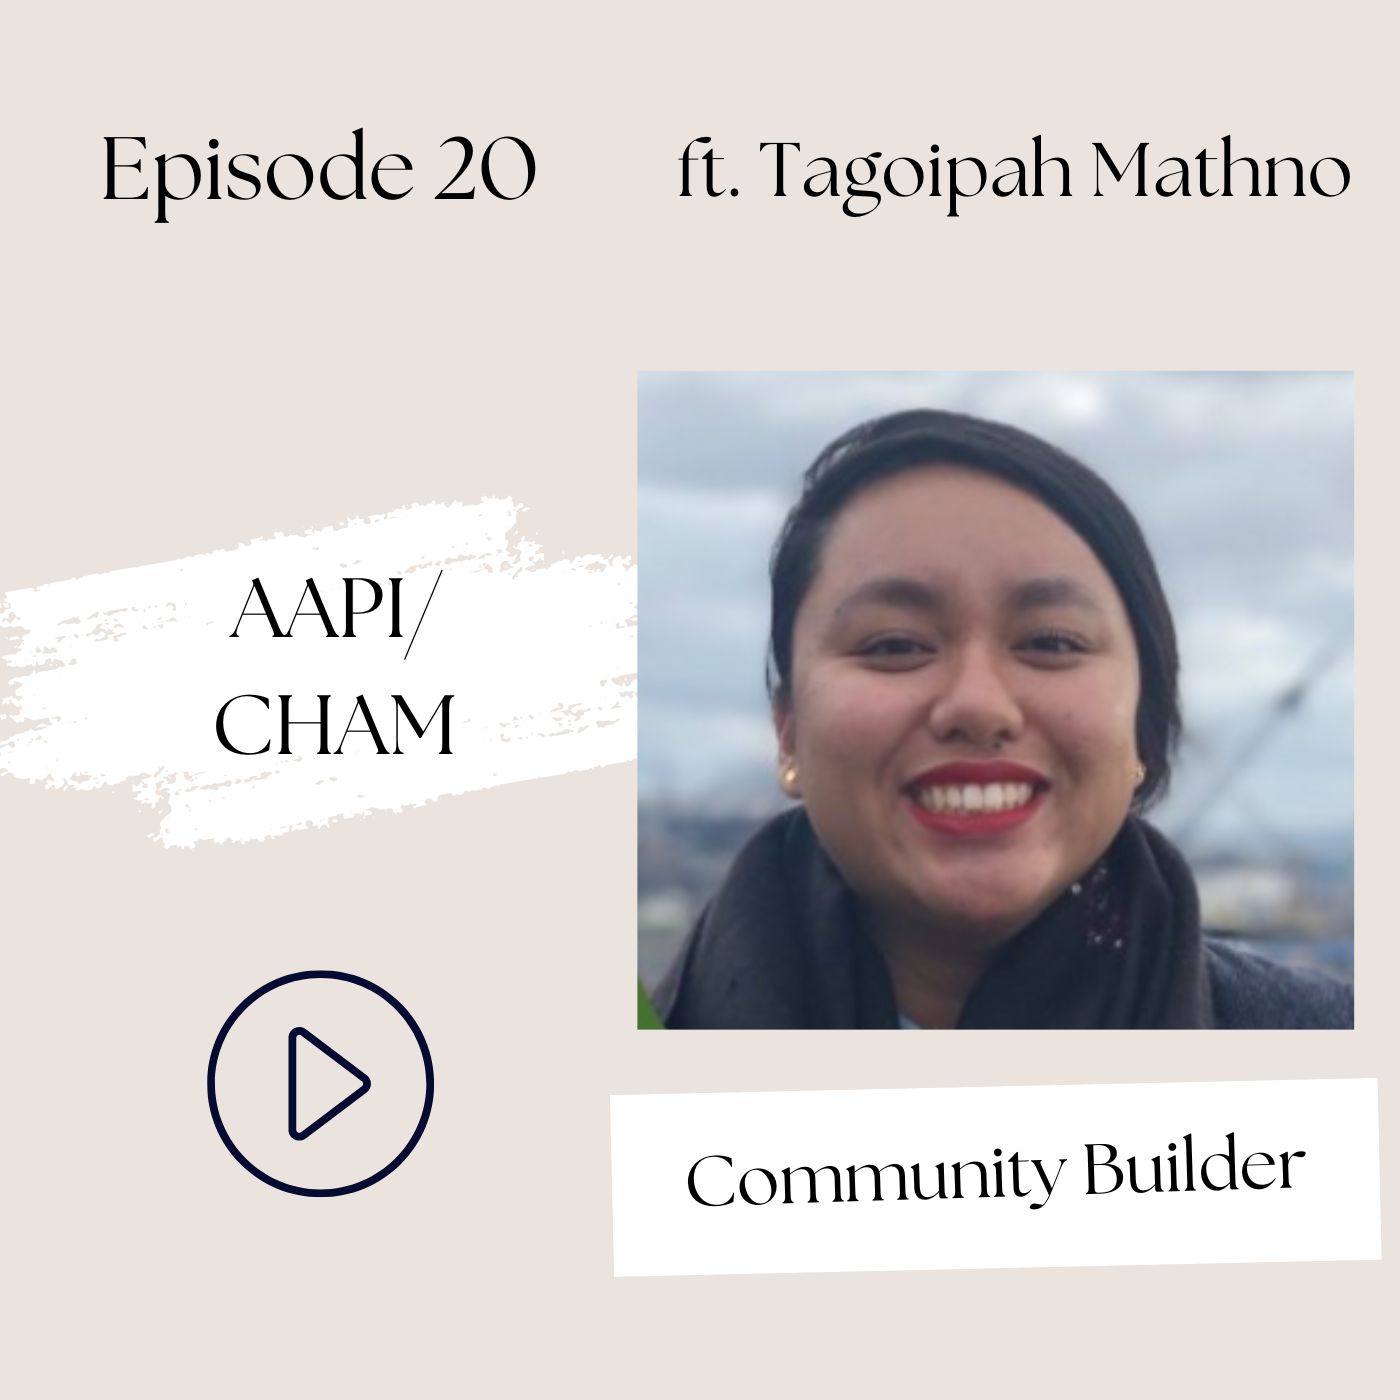 Healing across Cultures: The Cham Refugee Experience in Healthcare (Tagoipah Mathno, Ep 20)